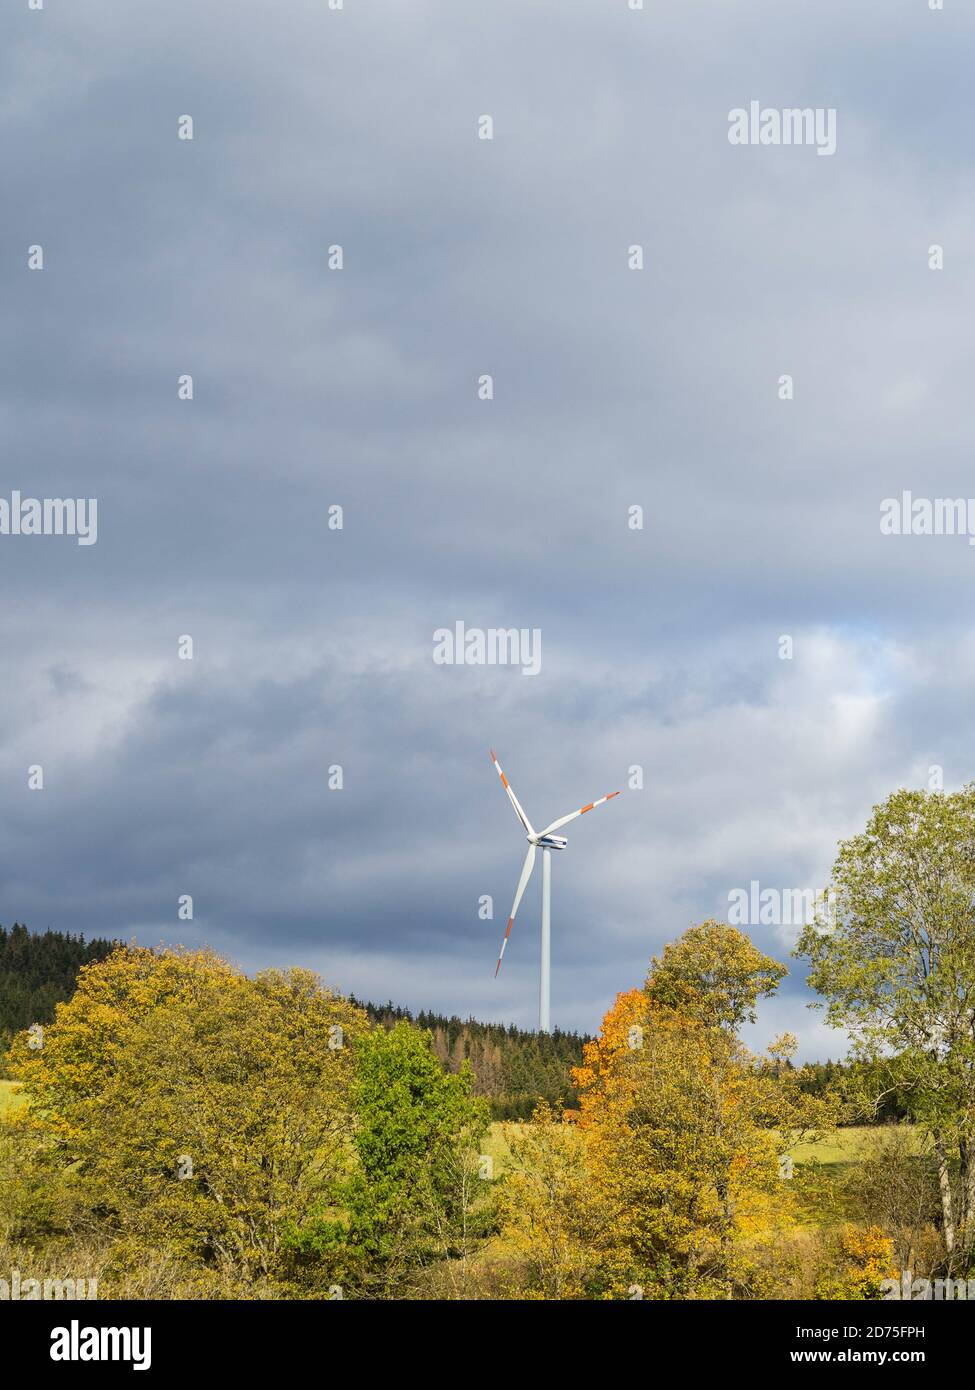 A single windmill behind some fall foliage trees sunlit under a cloudy sky. Weidenhausen, NRW, Germany. Stock Photo